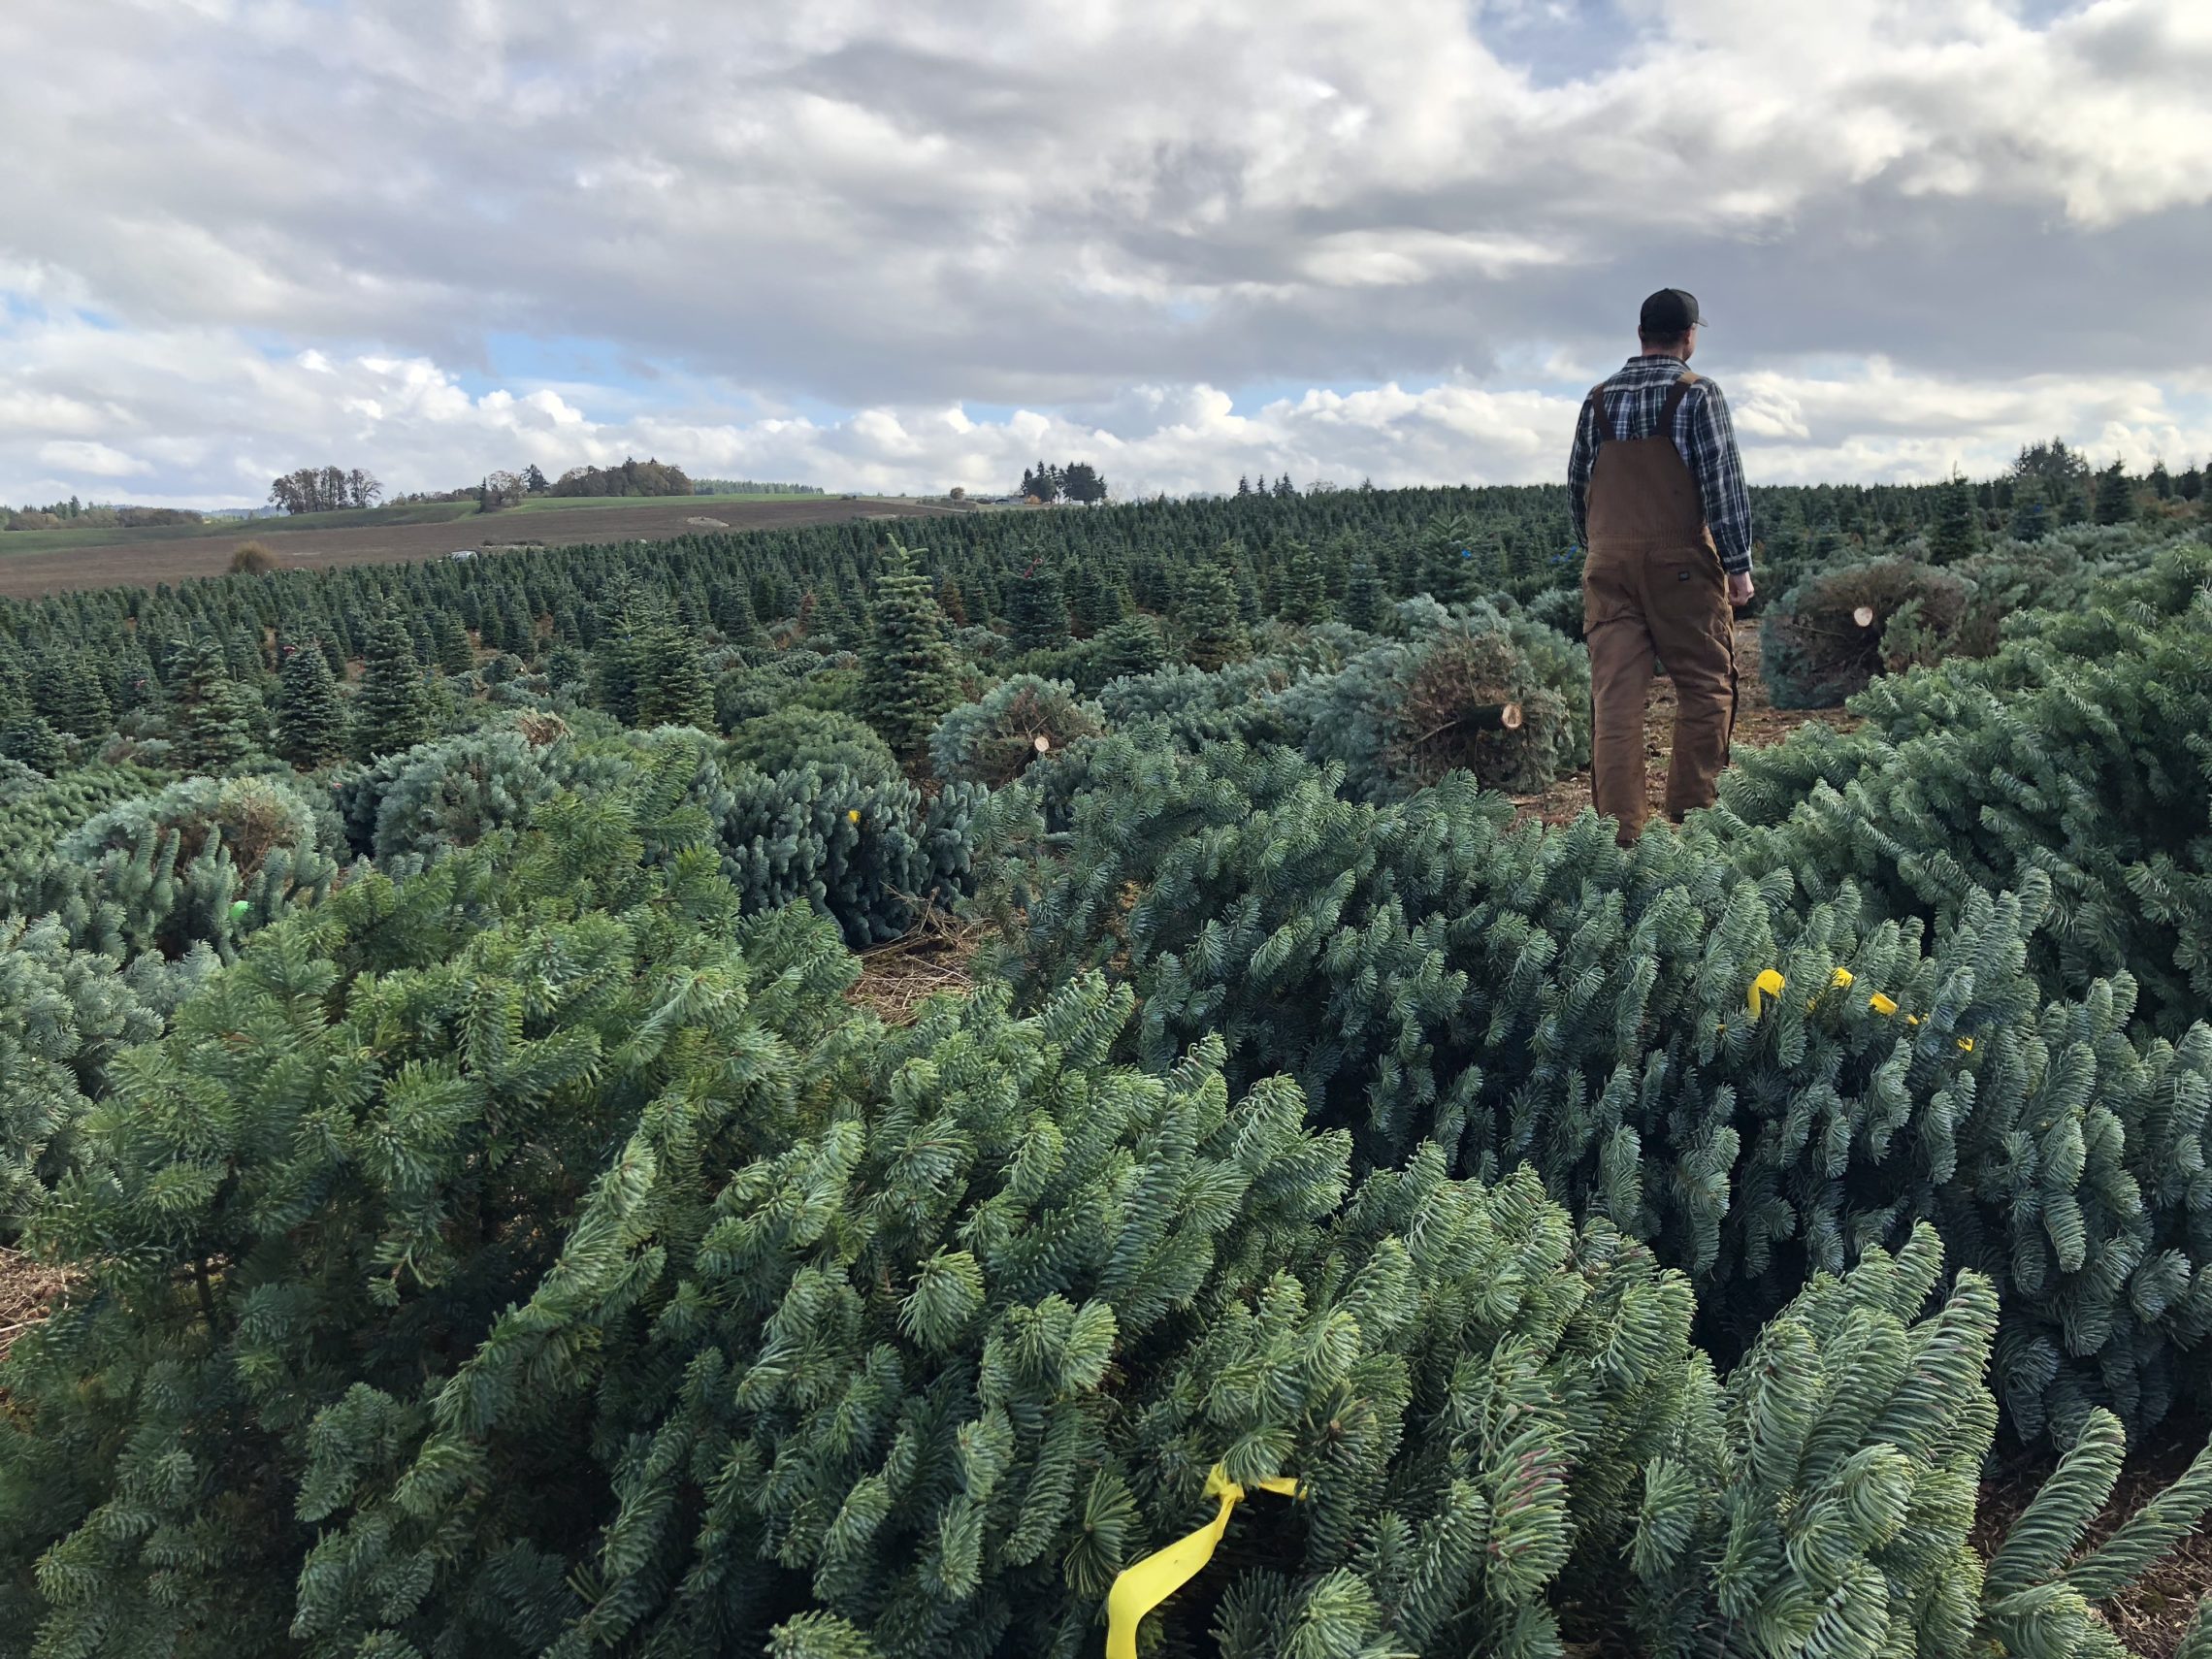 Casey Grogan walks through some recently cut noble fir Christmas trees at his farm near Silverton, Ore. This year he plans to harvest 60,000 trees off his property. CREDIT: ANNA KING